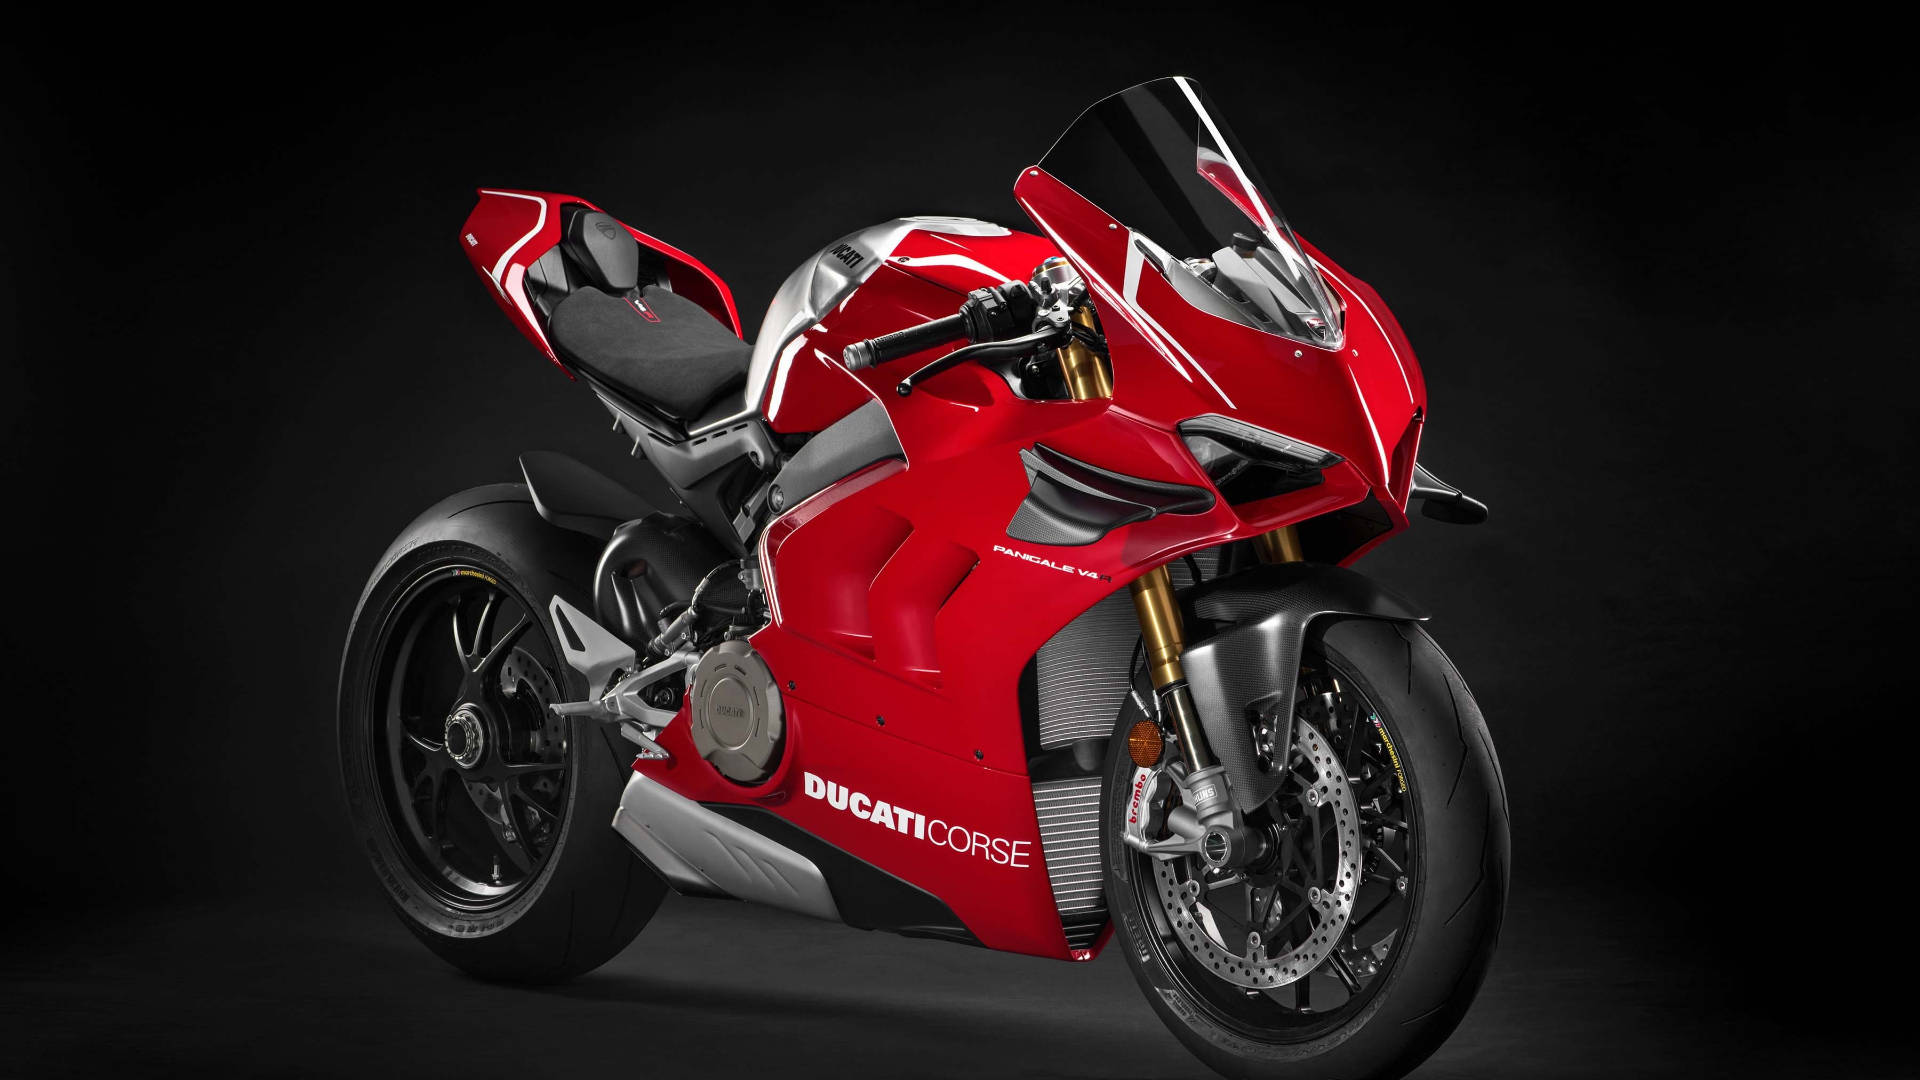 Get ready to experience unparalleled performance with the 2018 Ducati Panigale V4 R Wallpaper